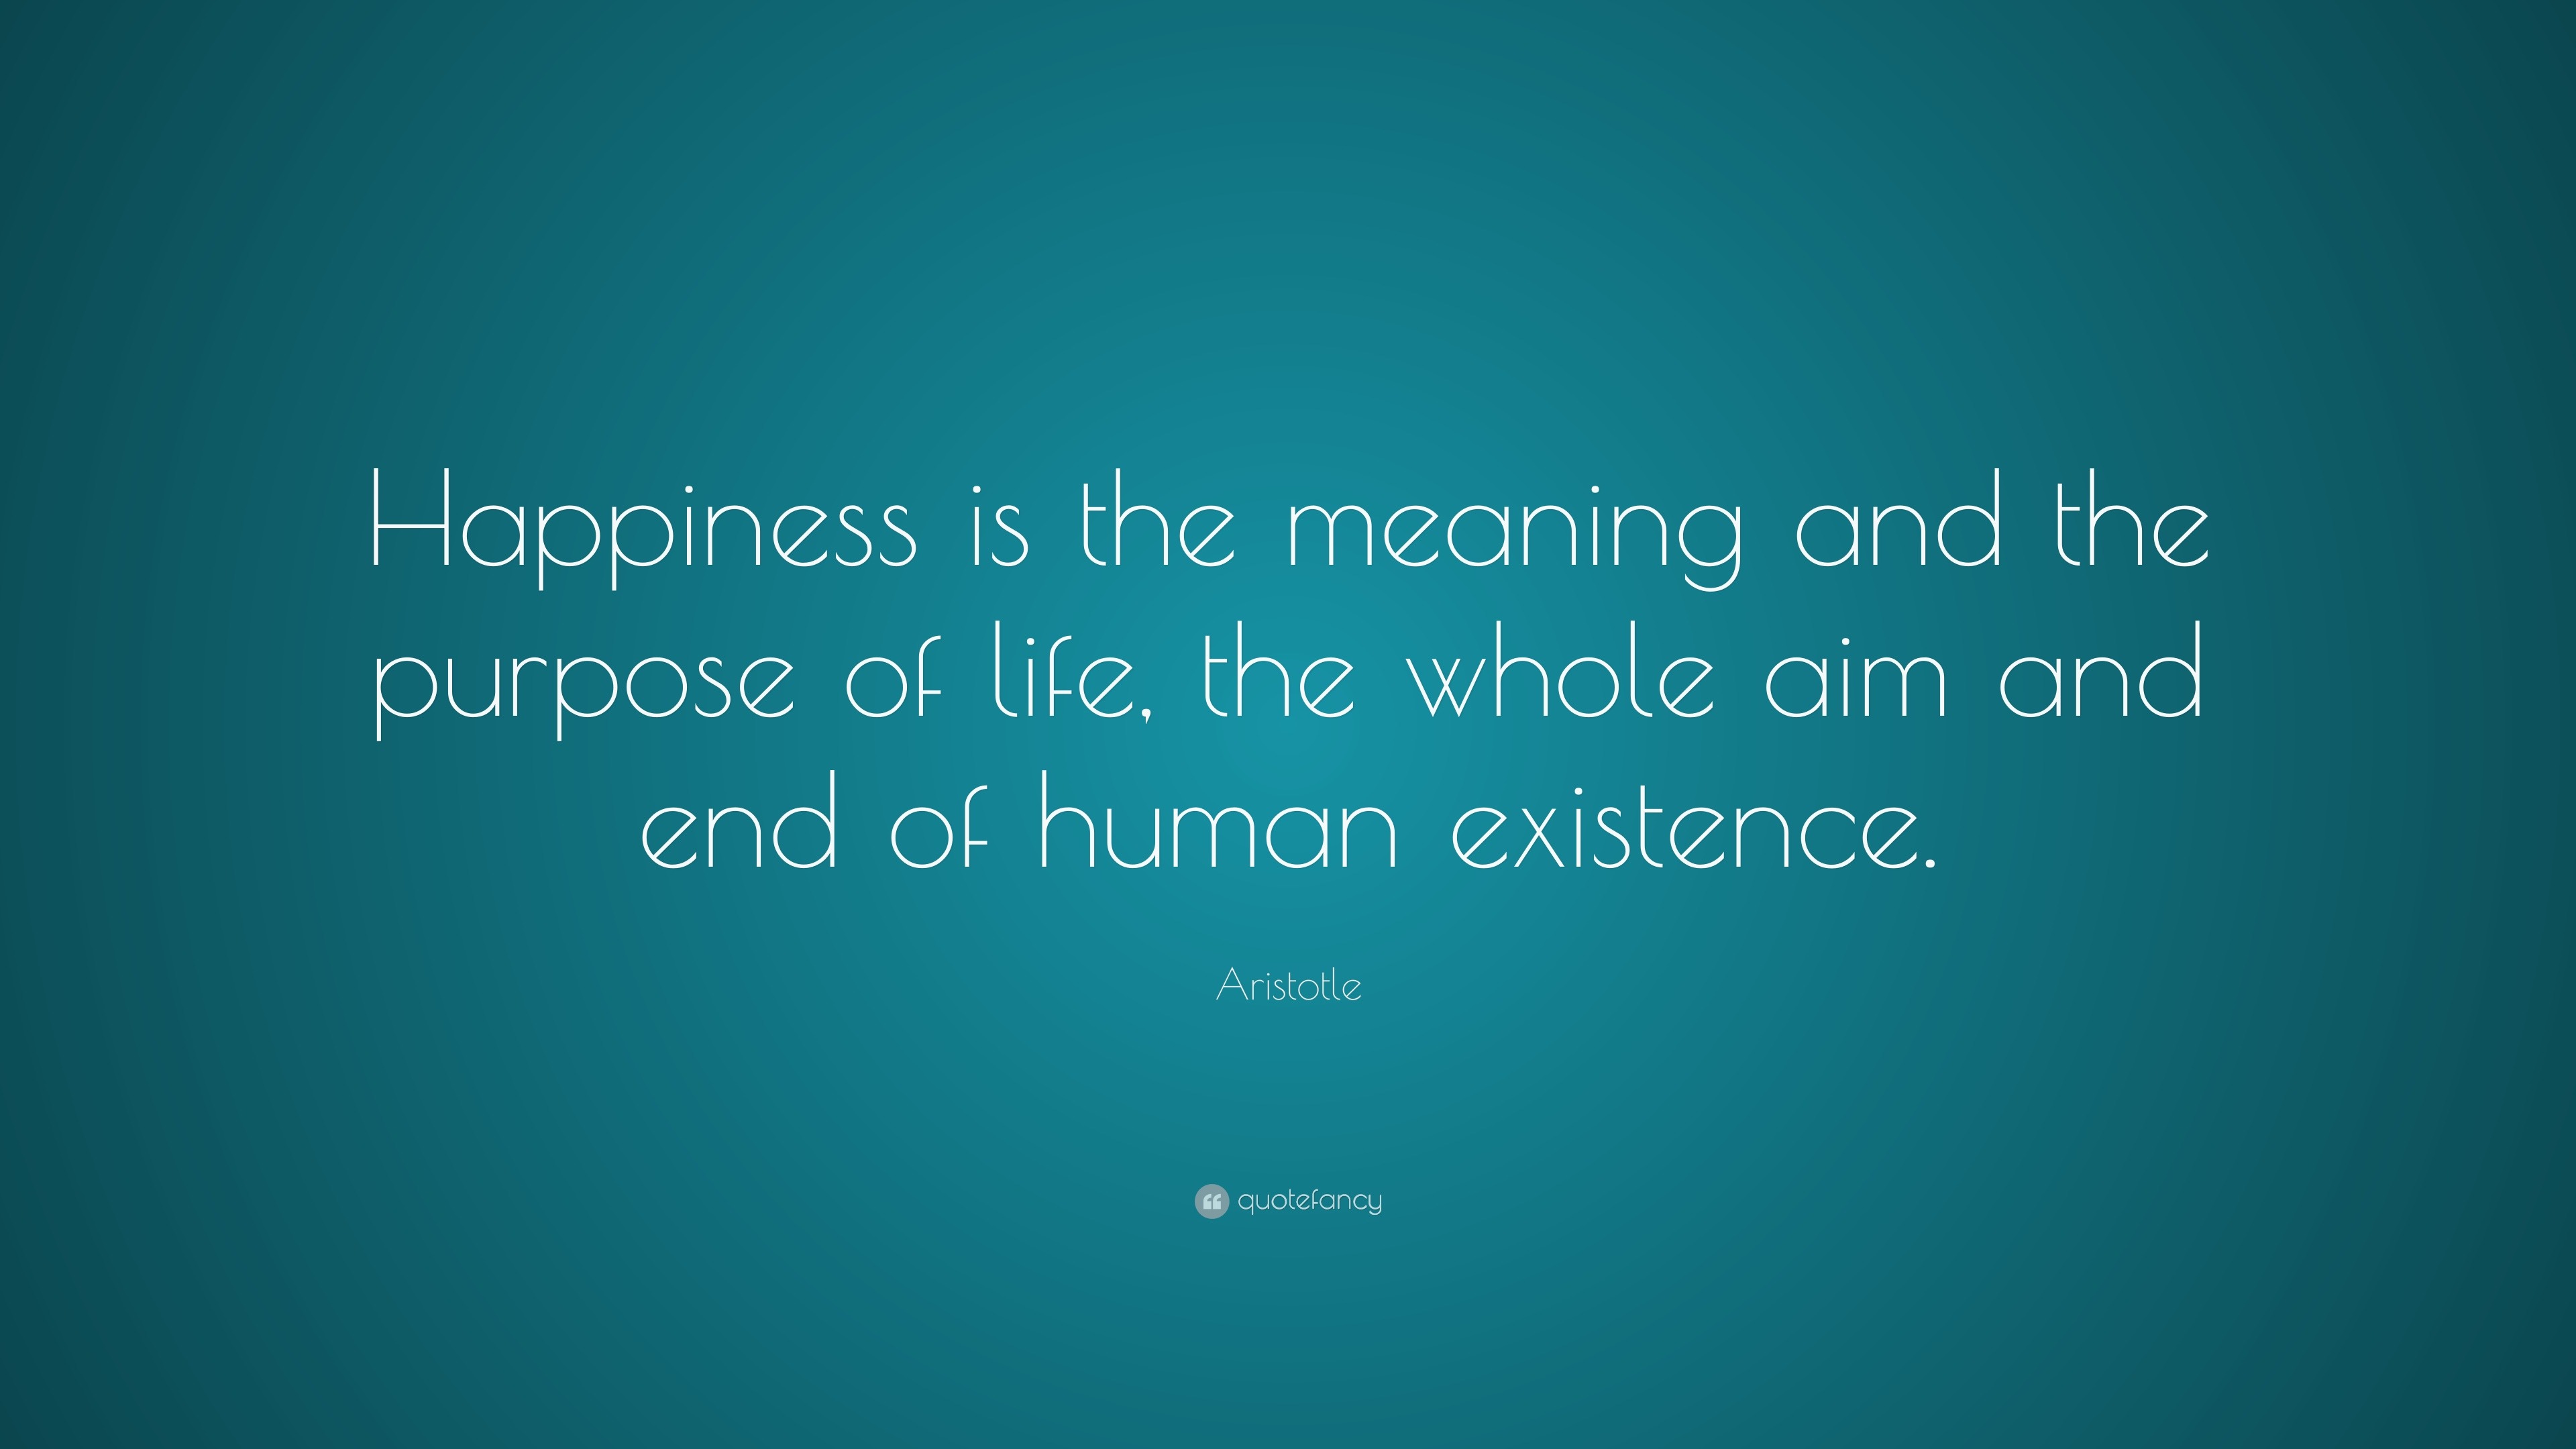 Aristotle Quote: "Happiness is the meaning and the purpose ...